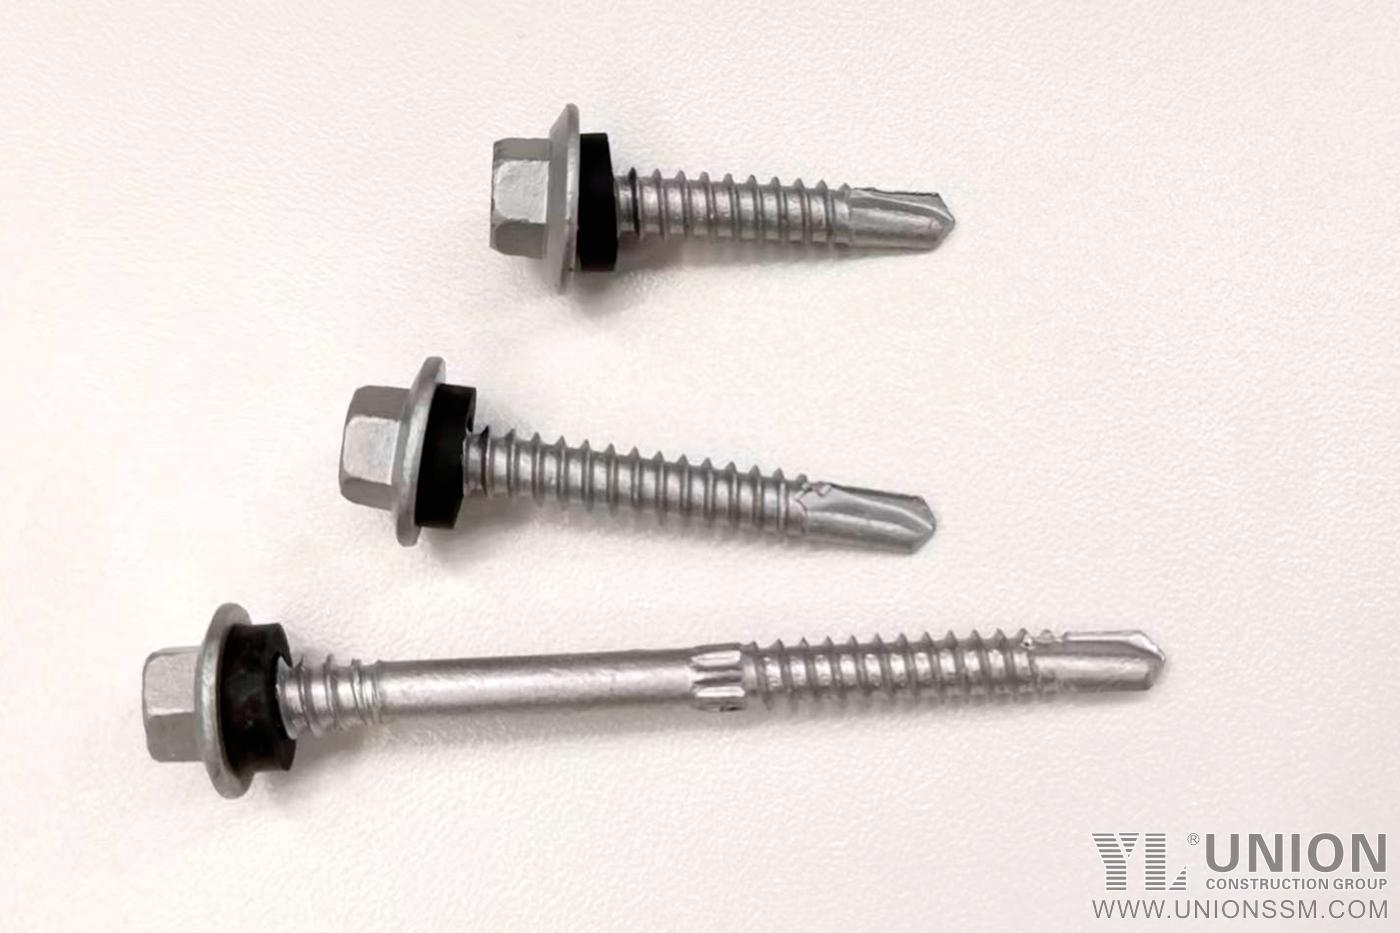 Class 3 And Class 4 Hex Head Self Drilling Screw (SDS) For MS Roofing & Cladding